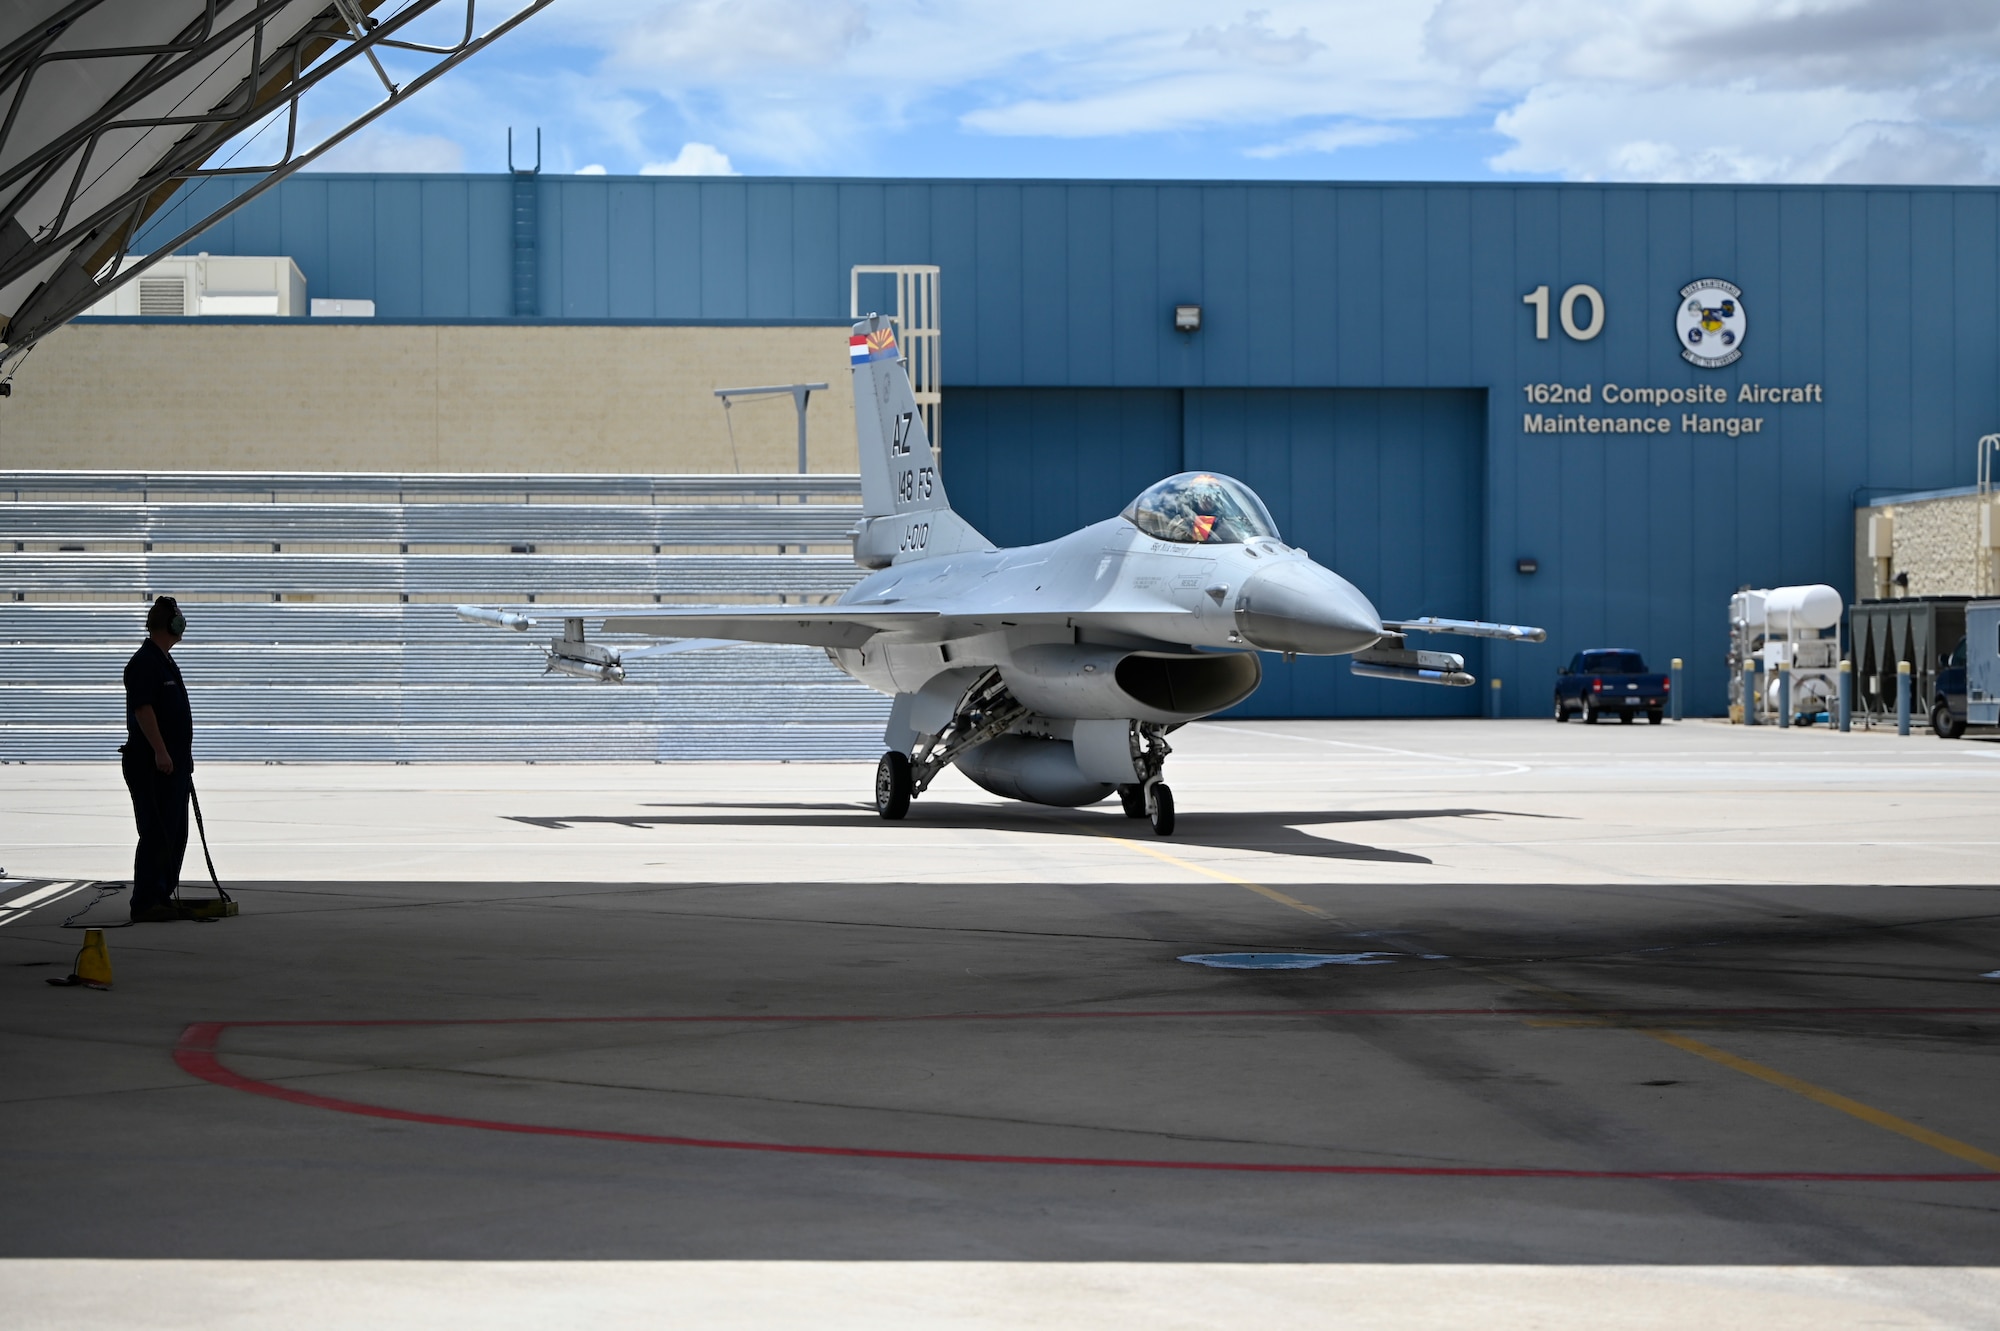 An F-16 crew chief from the 162nd Wing at Morris Air National Guard Base in Tucson monitors an F-16 as it parks before engine shutdown after its final flight today. The RNLAF has commenced transition from the F-16 to the F-35. (U.S. Air National Guard photo by Maj. Angela Walz)